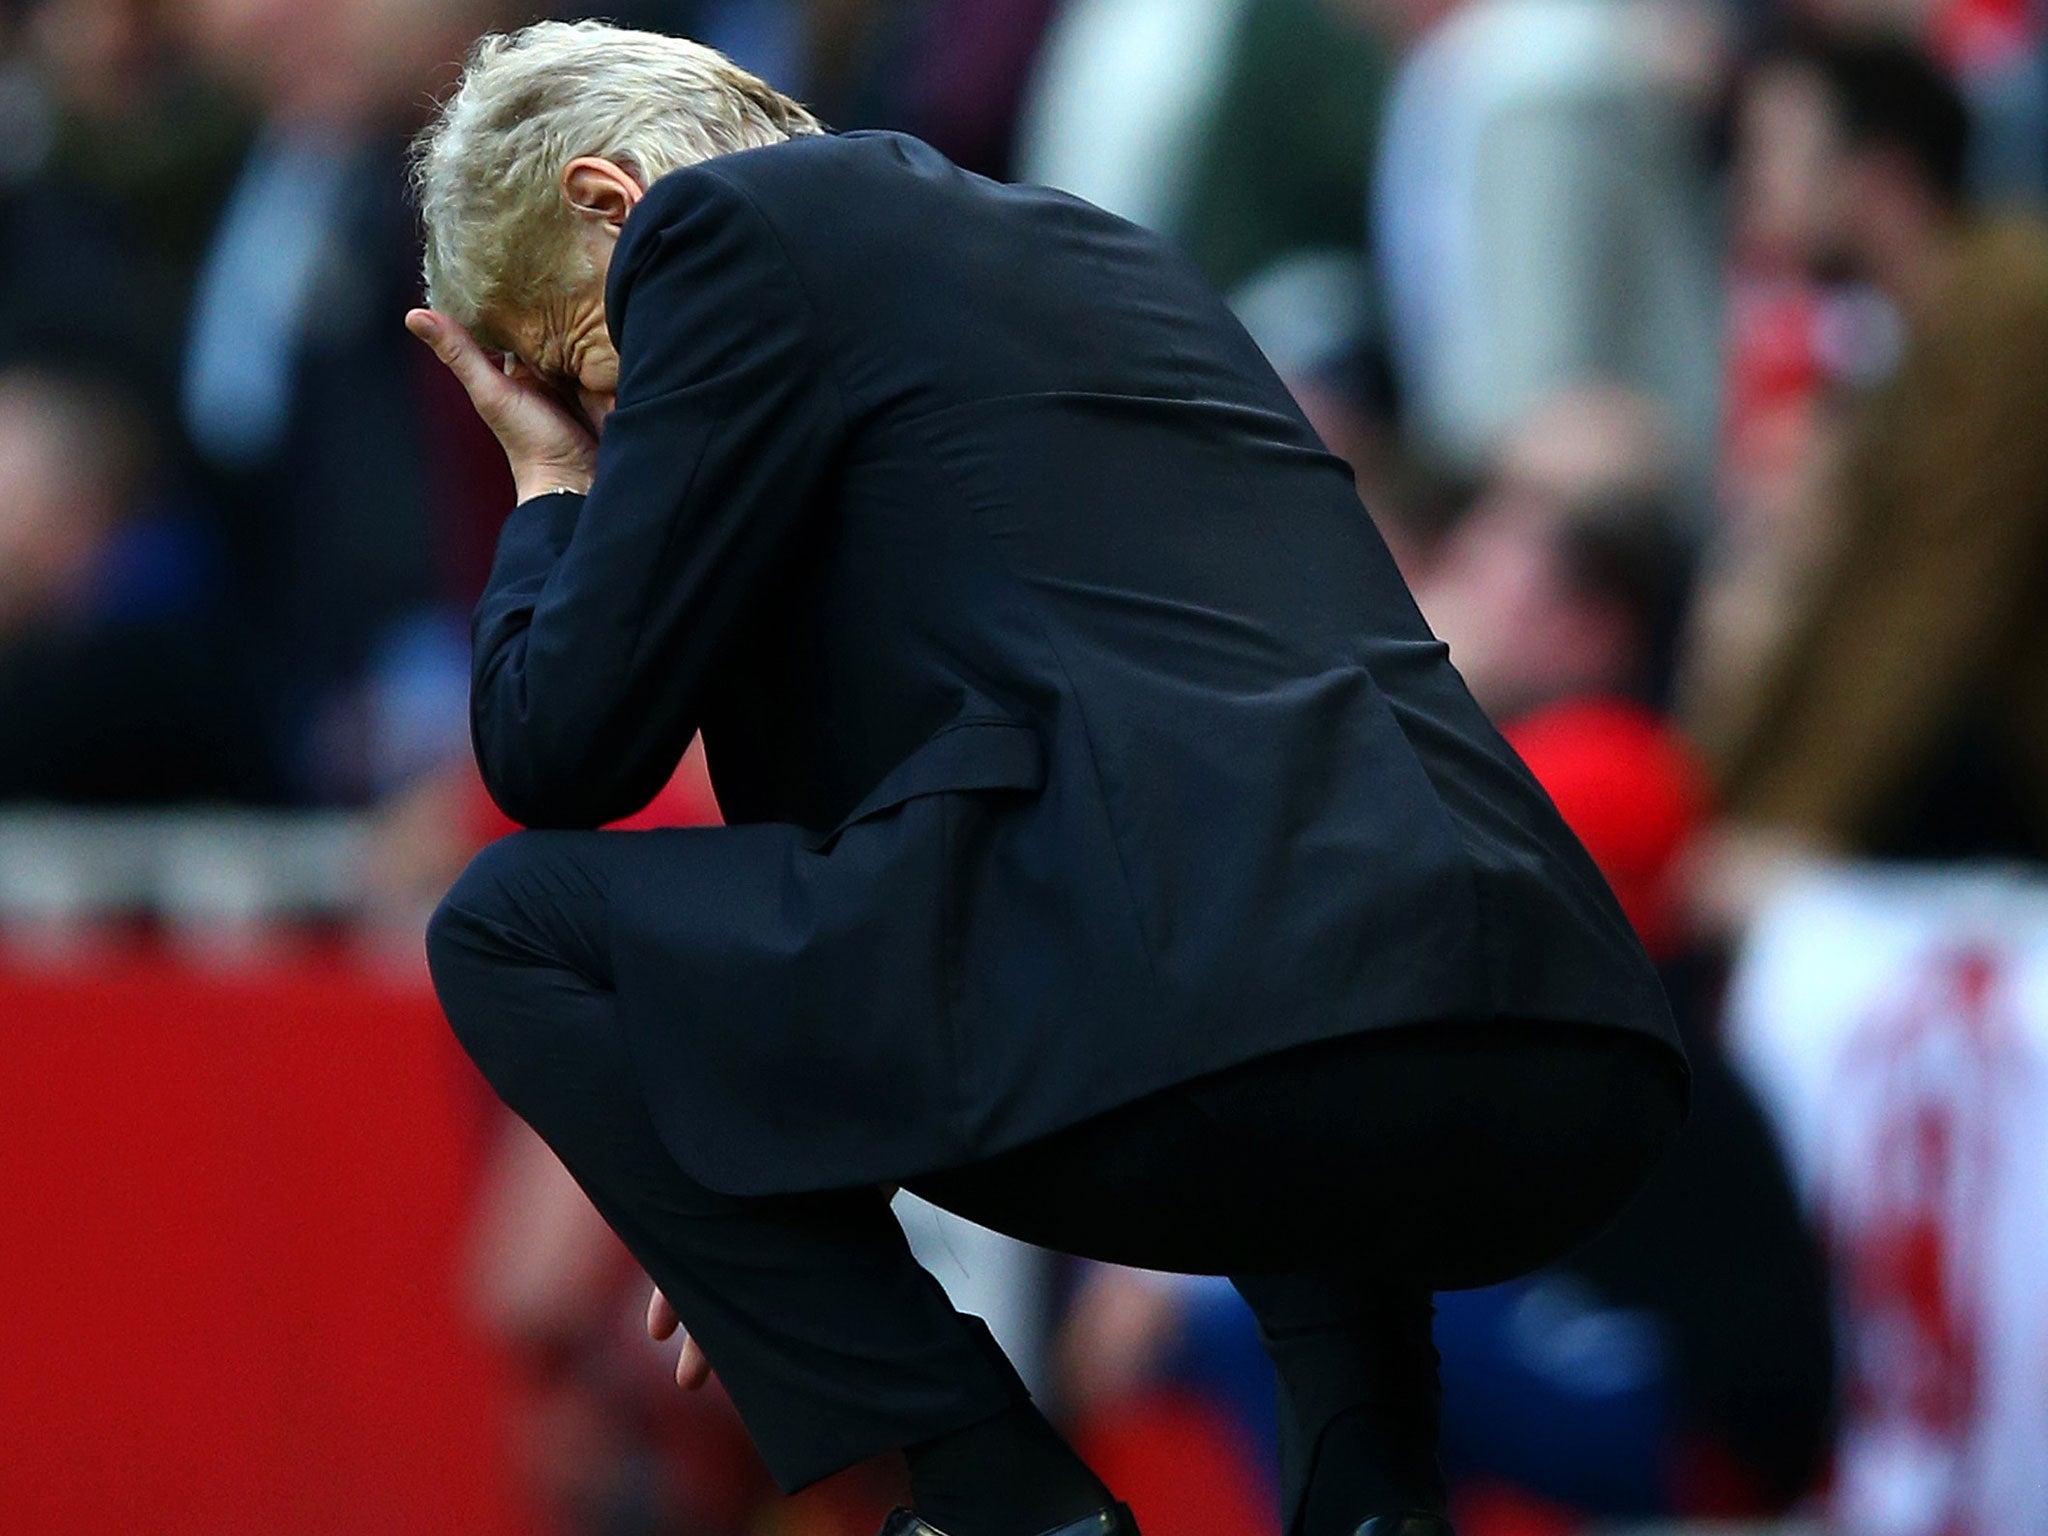 Arsene Wenger reacts to Arsenal conceding a goal to Hull during the 2-2 draw